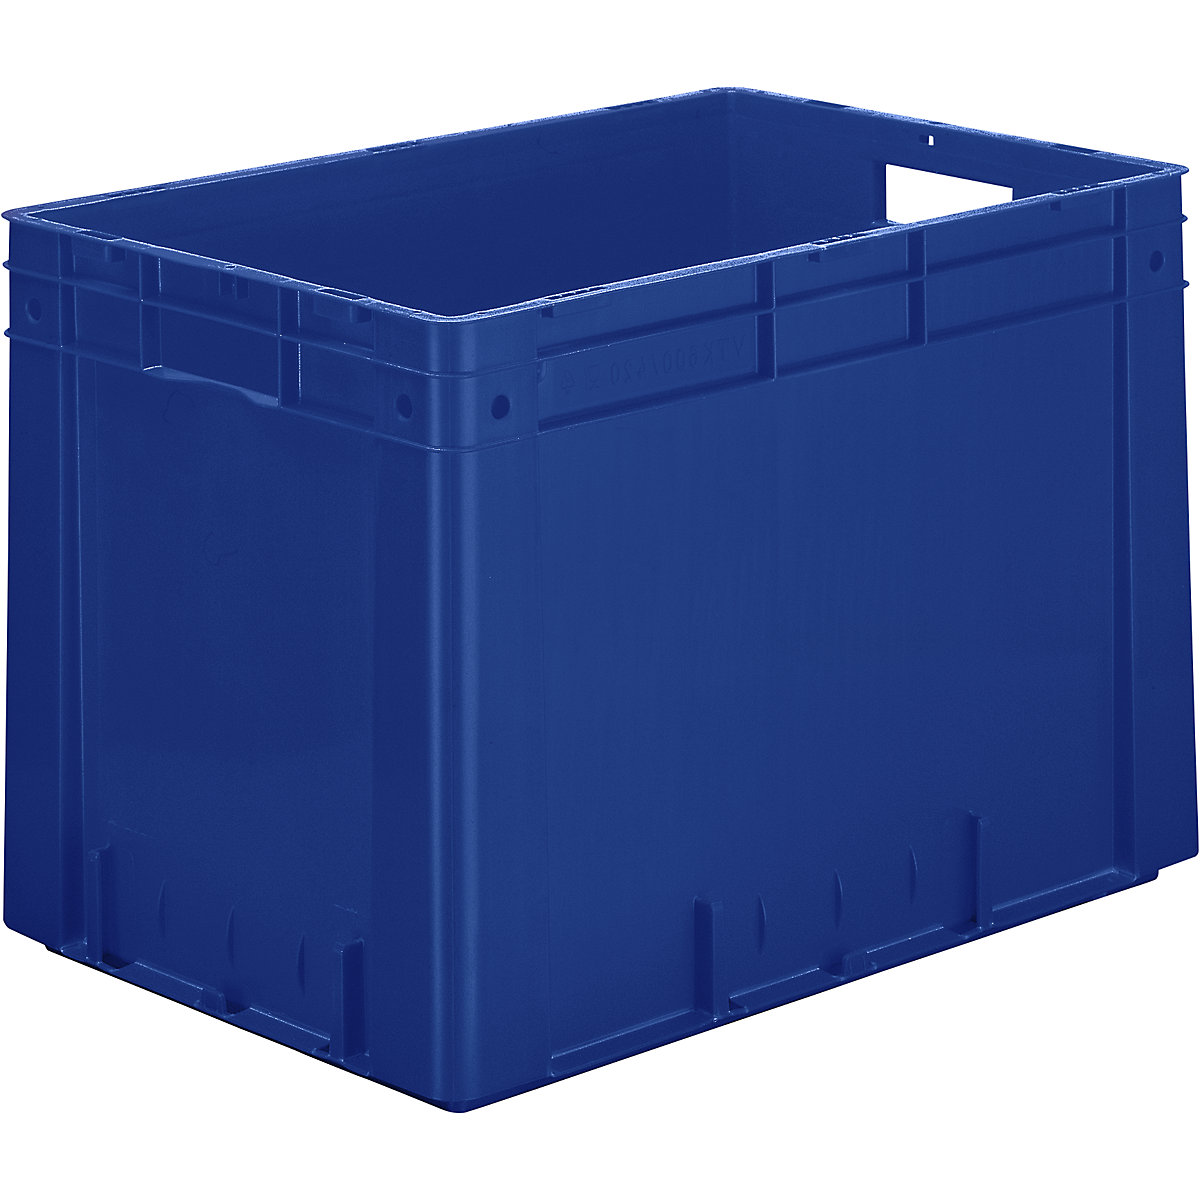 Heavy duty Euro container, polypropylene, capacity 80 l, LxWxH 600 x 400 x 420 mm, solid walls, solid base, blue, pack of 2